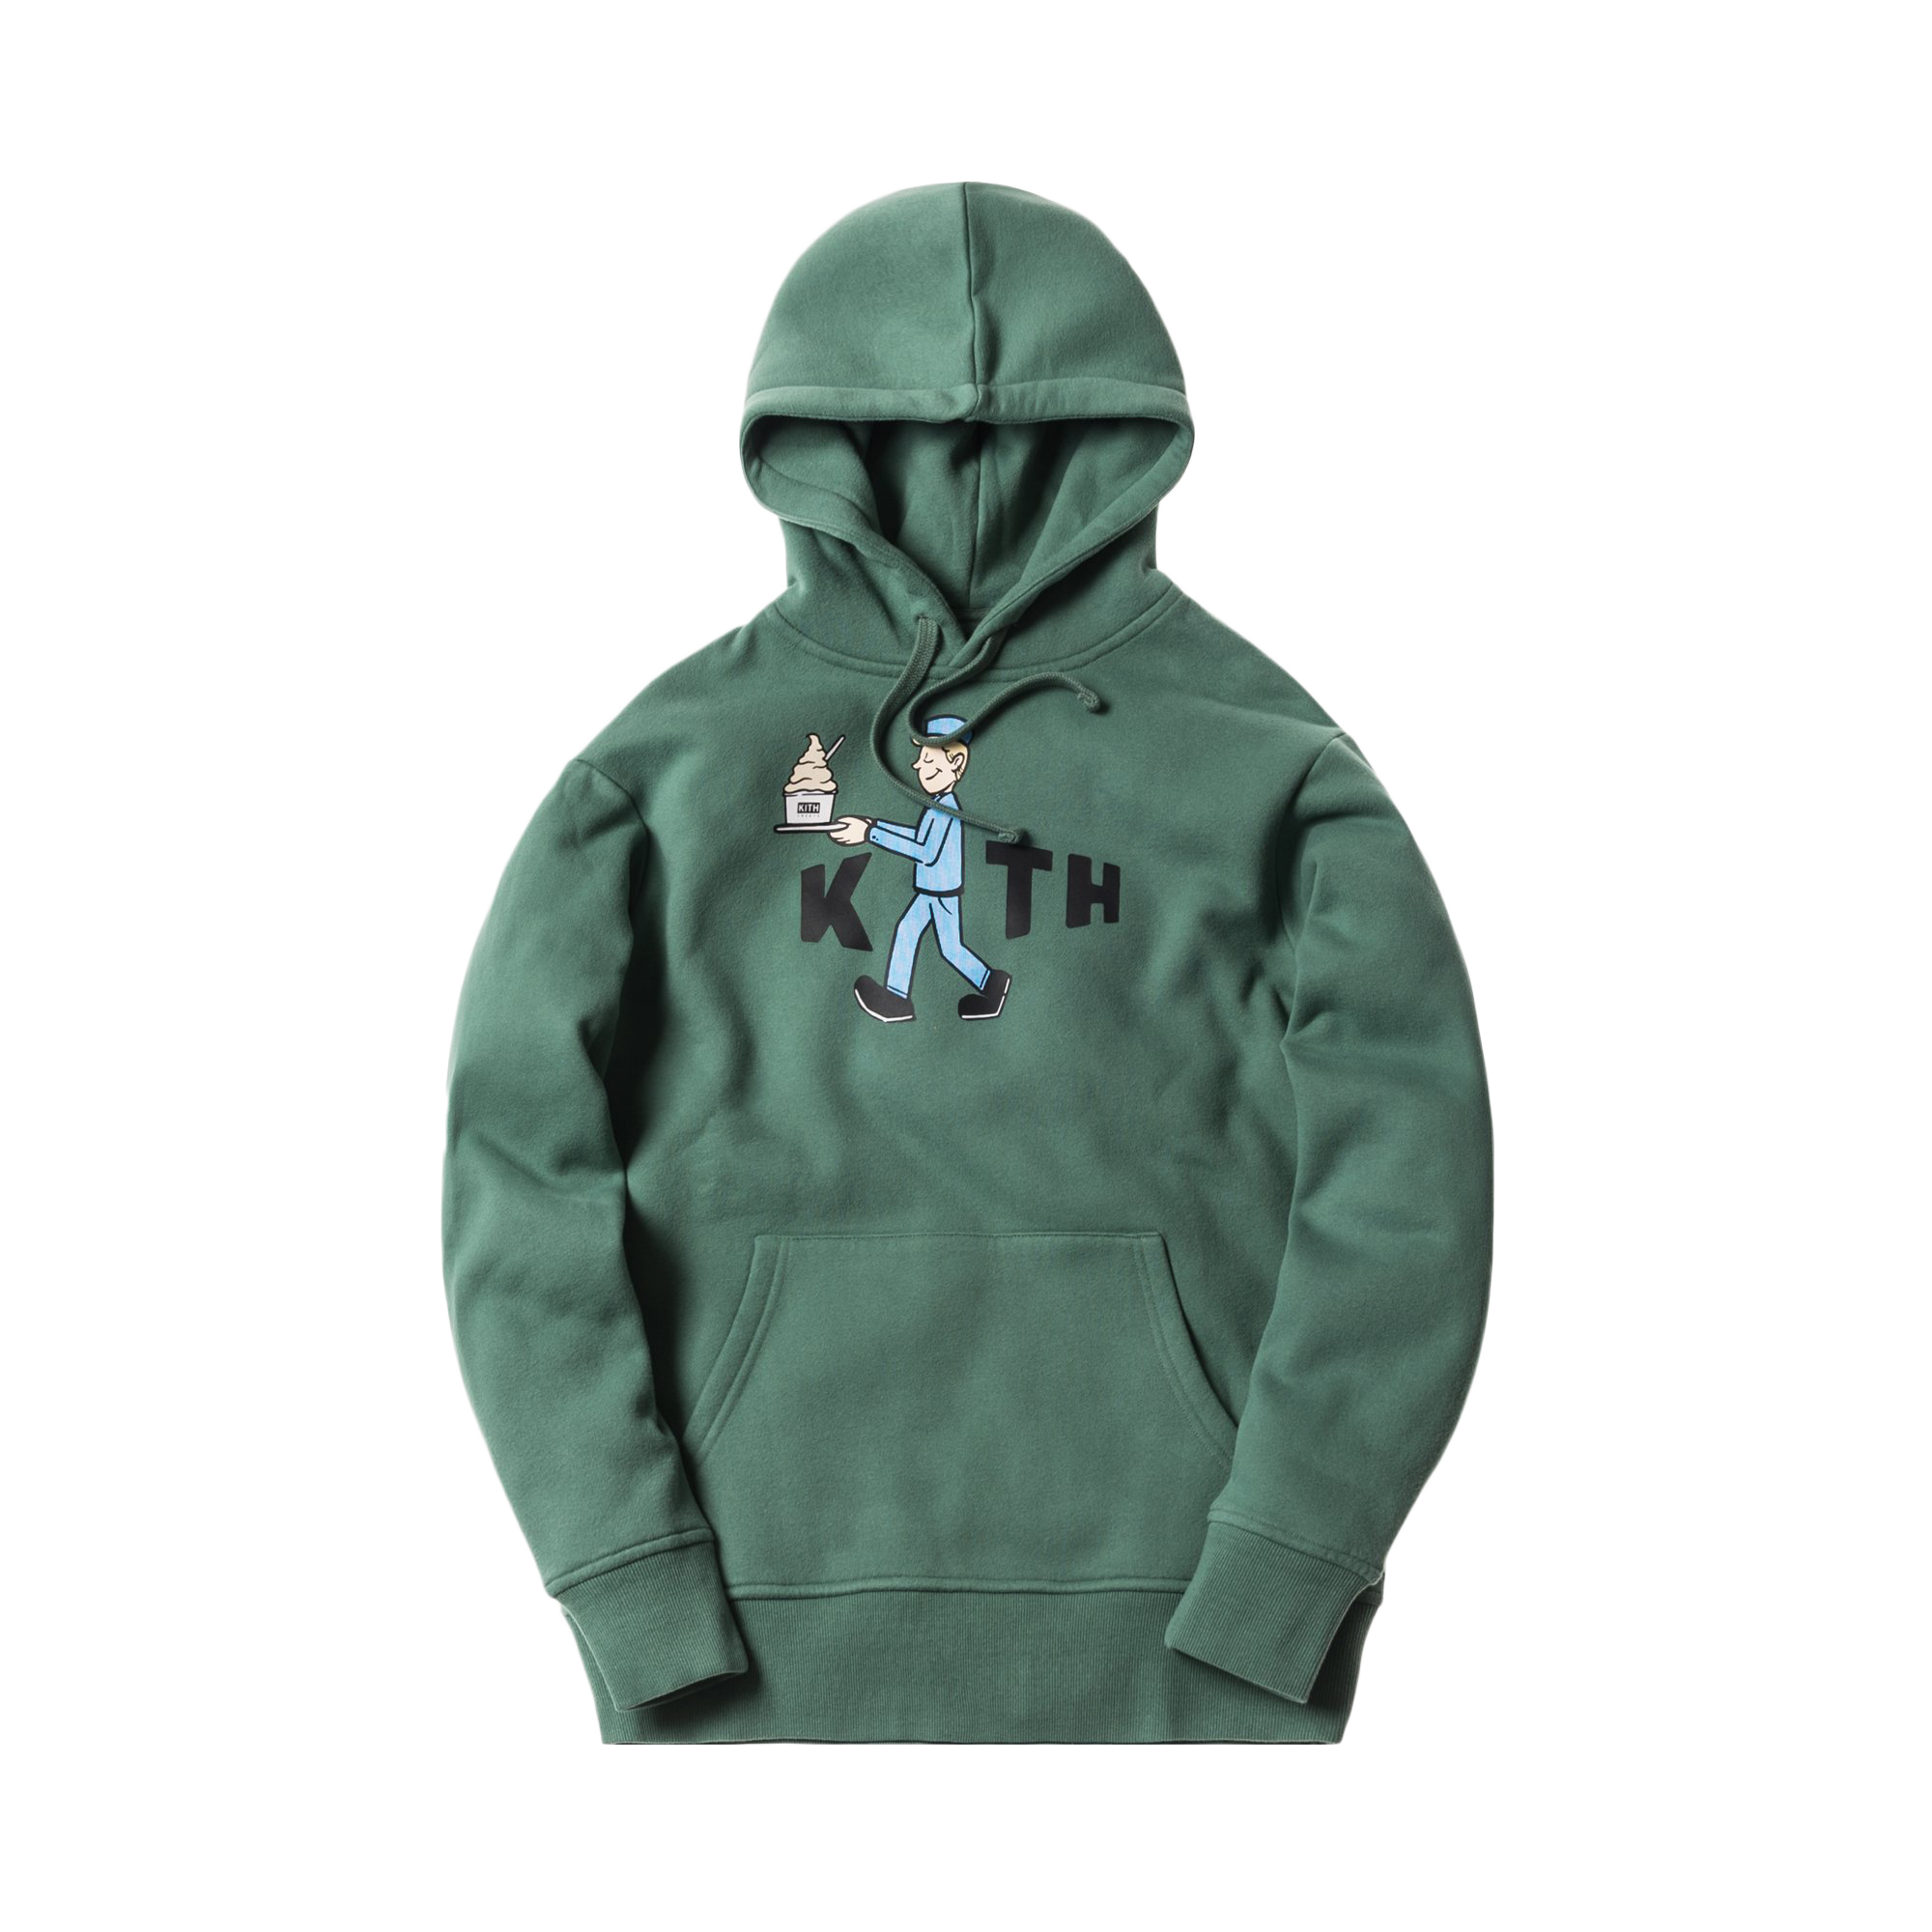 KITH TREATS DELIVERED HOODIE プリントパーカー - パーカー